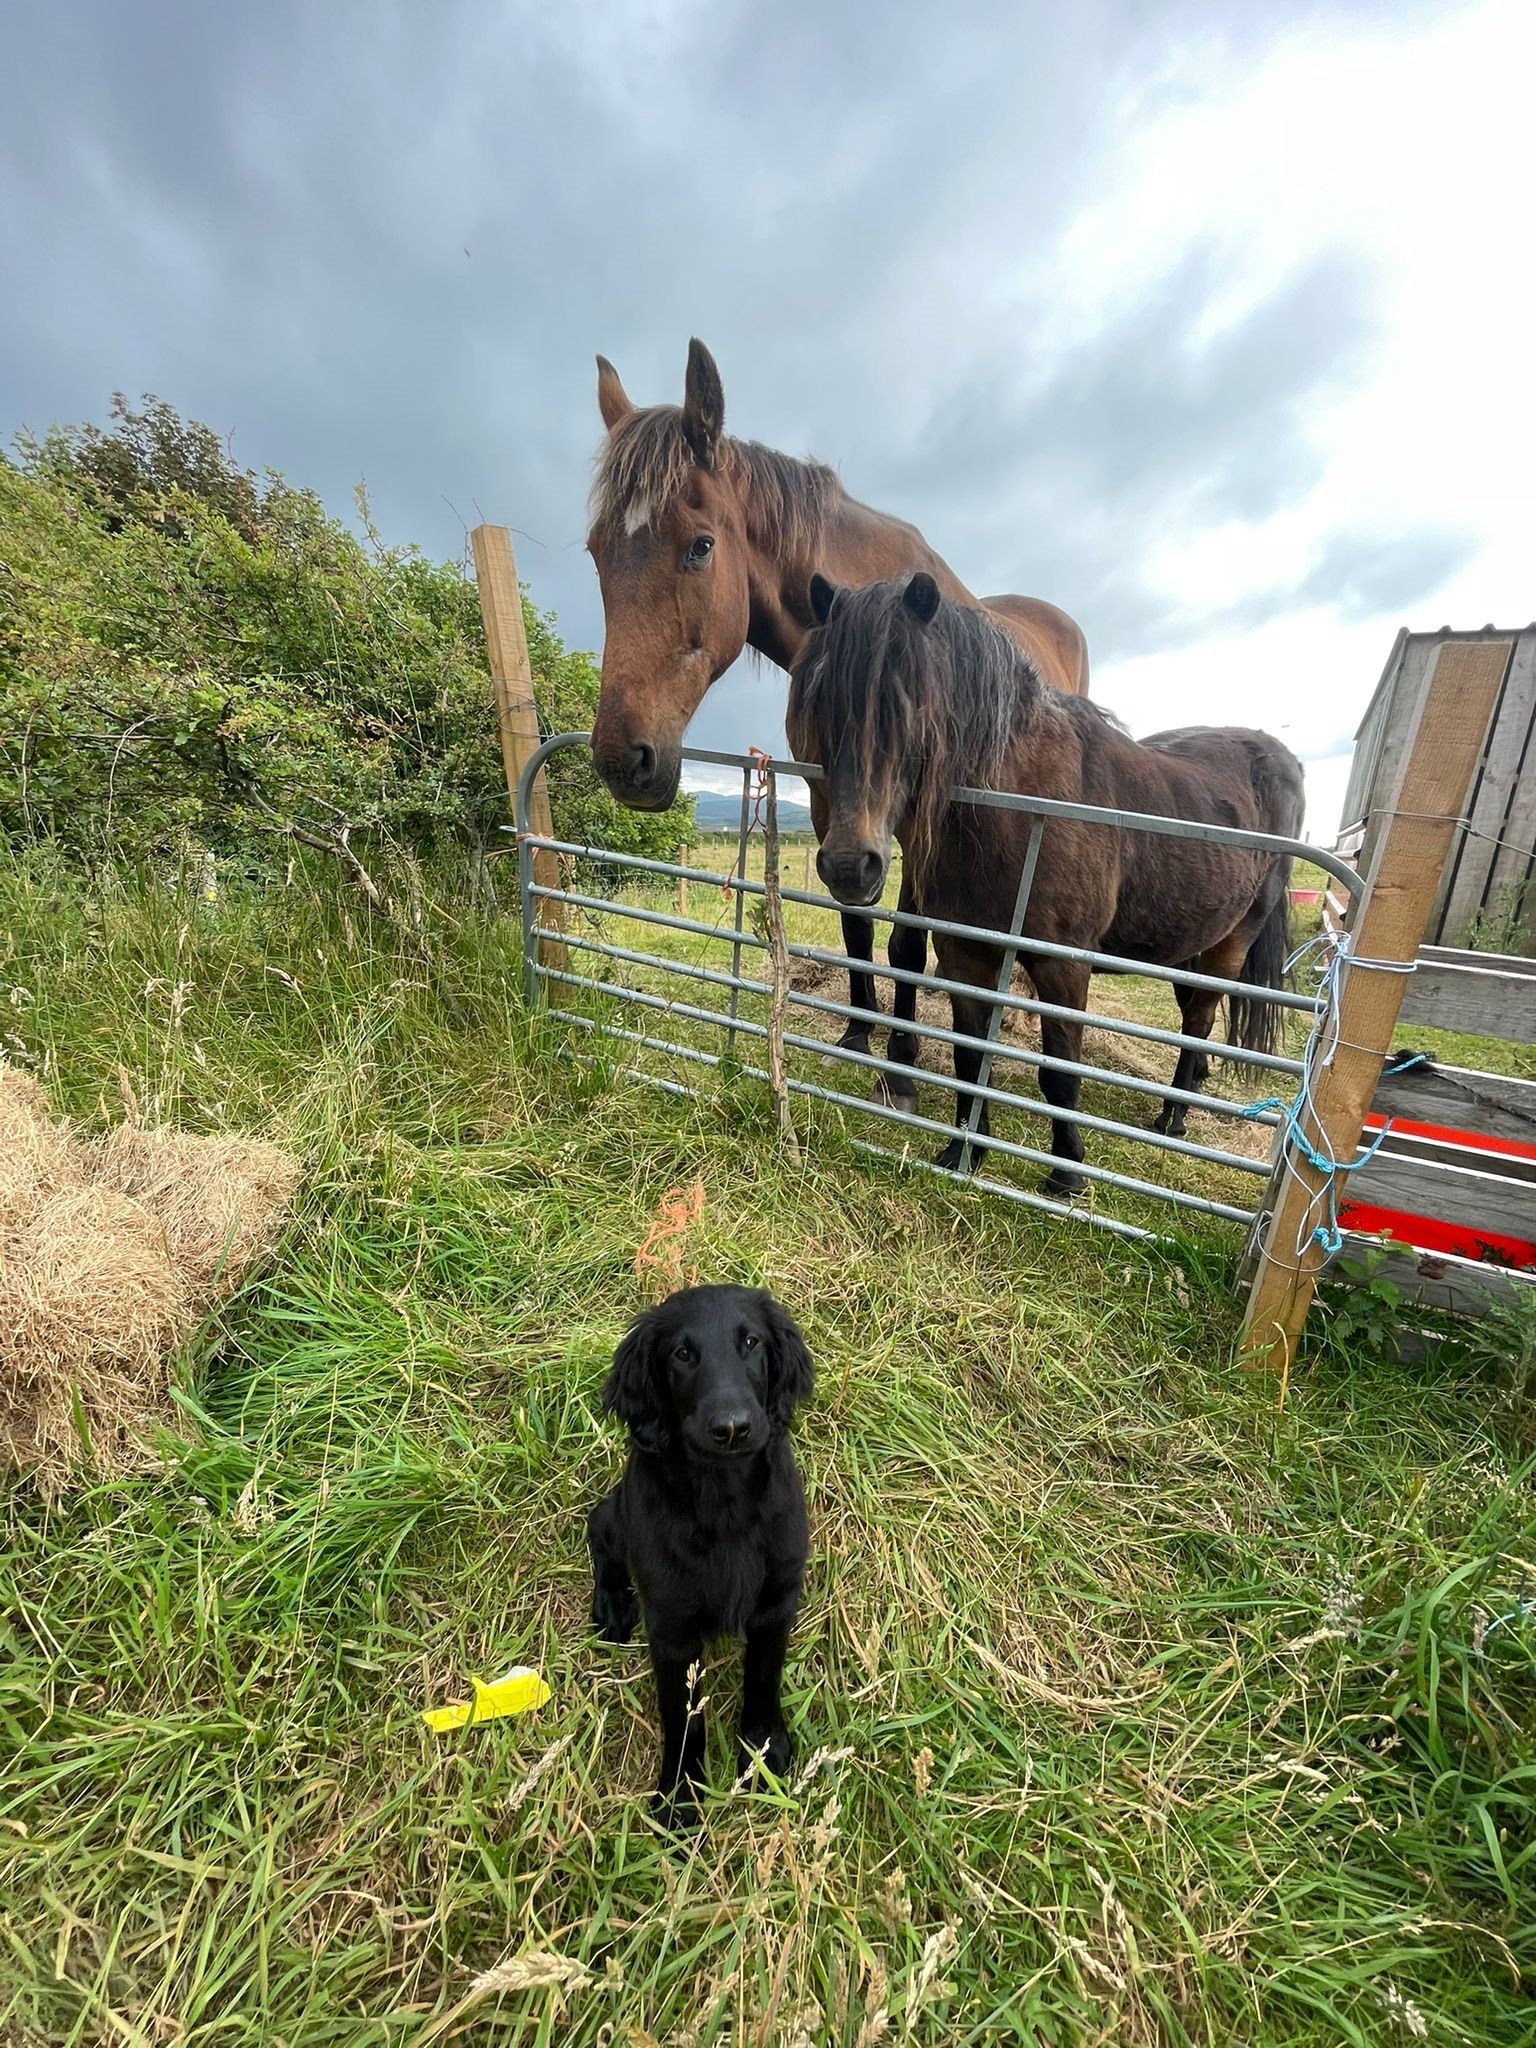 New puppy Tiggy, a flat coated retriever, looks on at the clipping antics with Hansel and Muffin